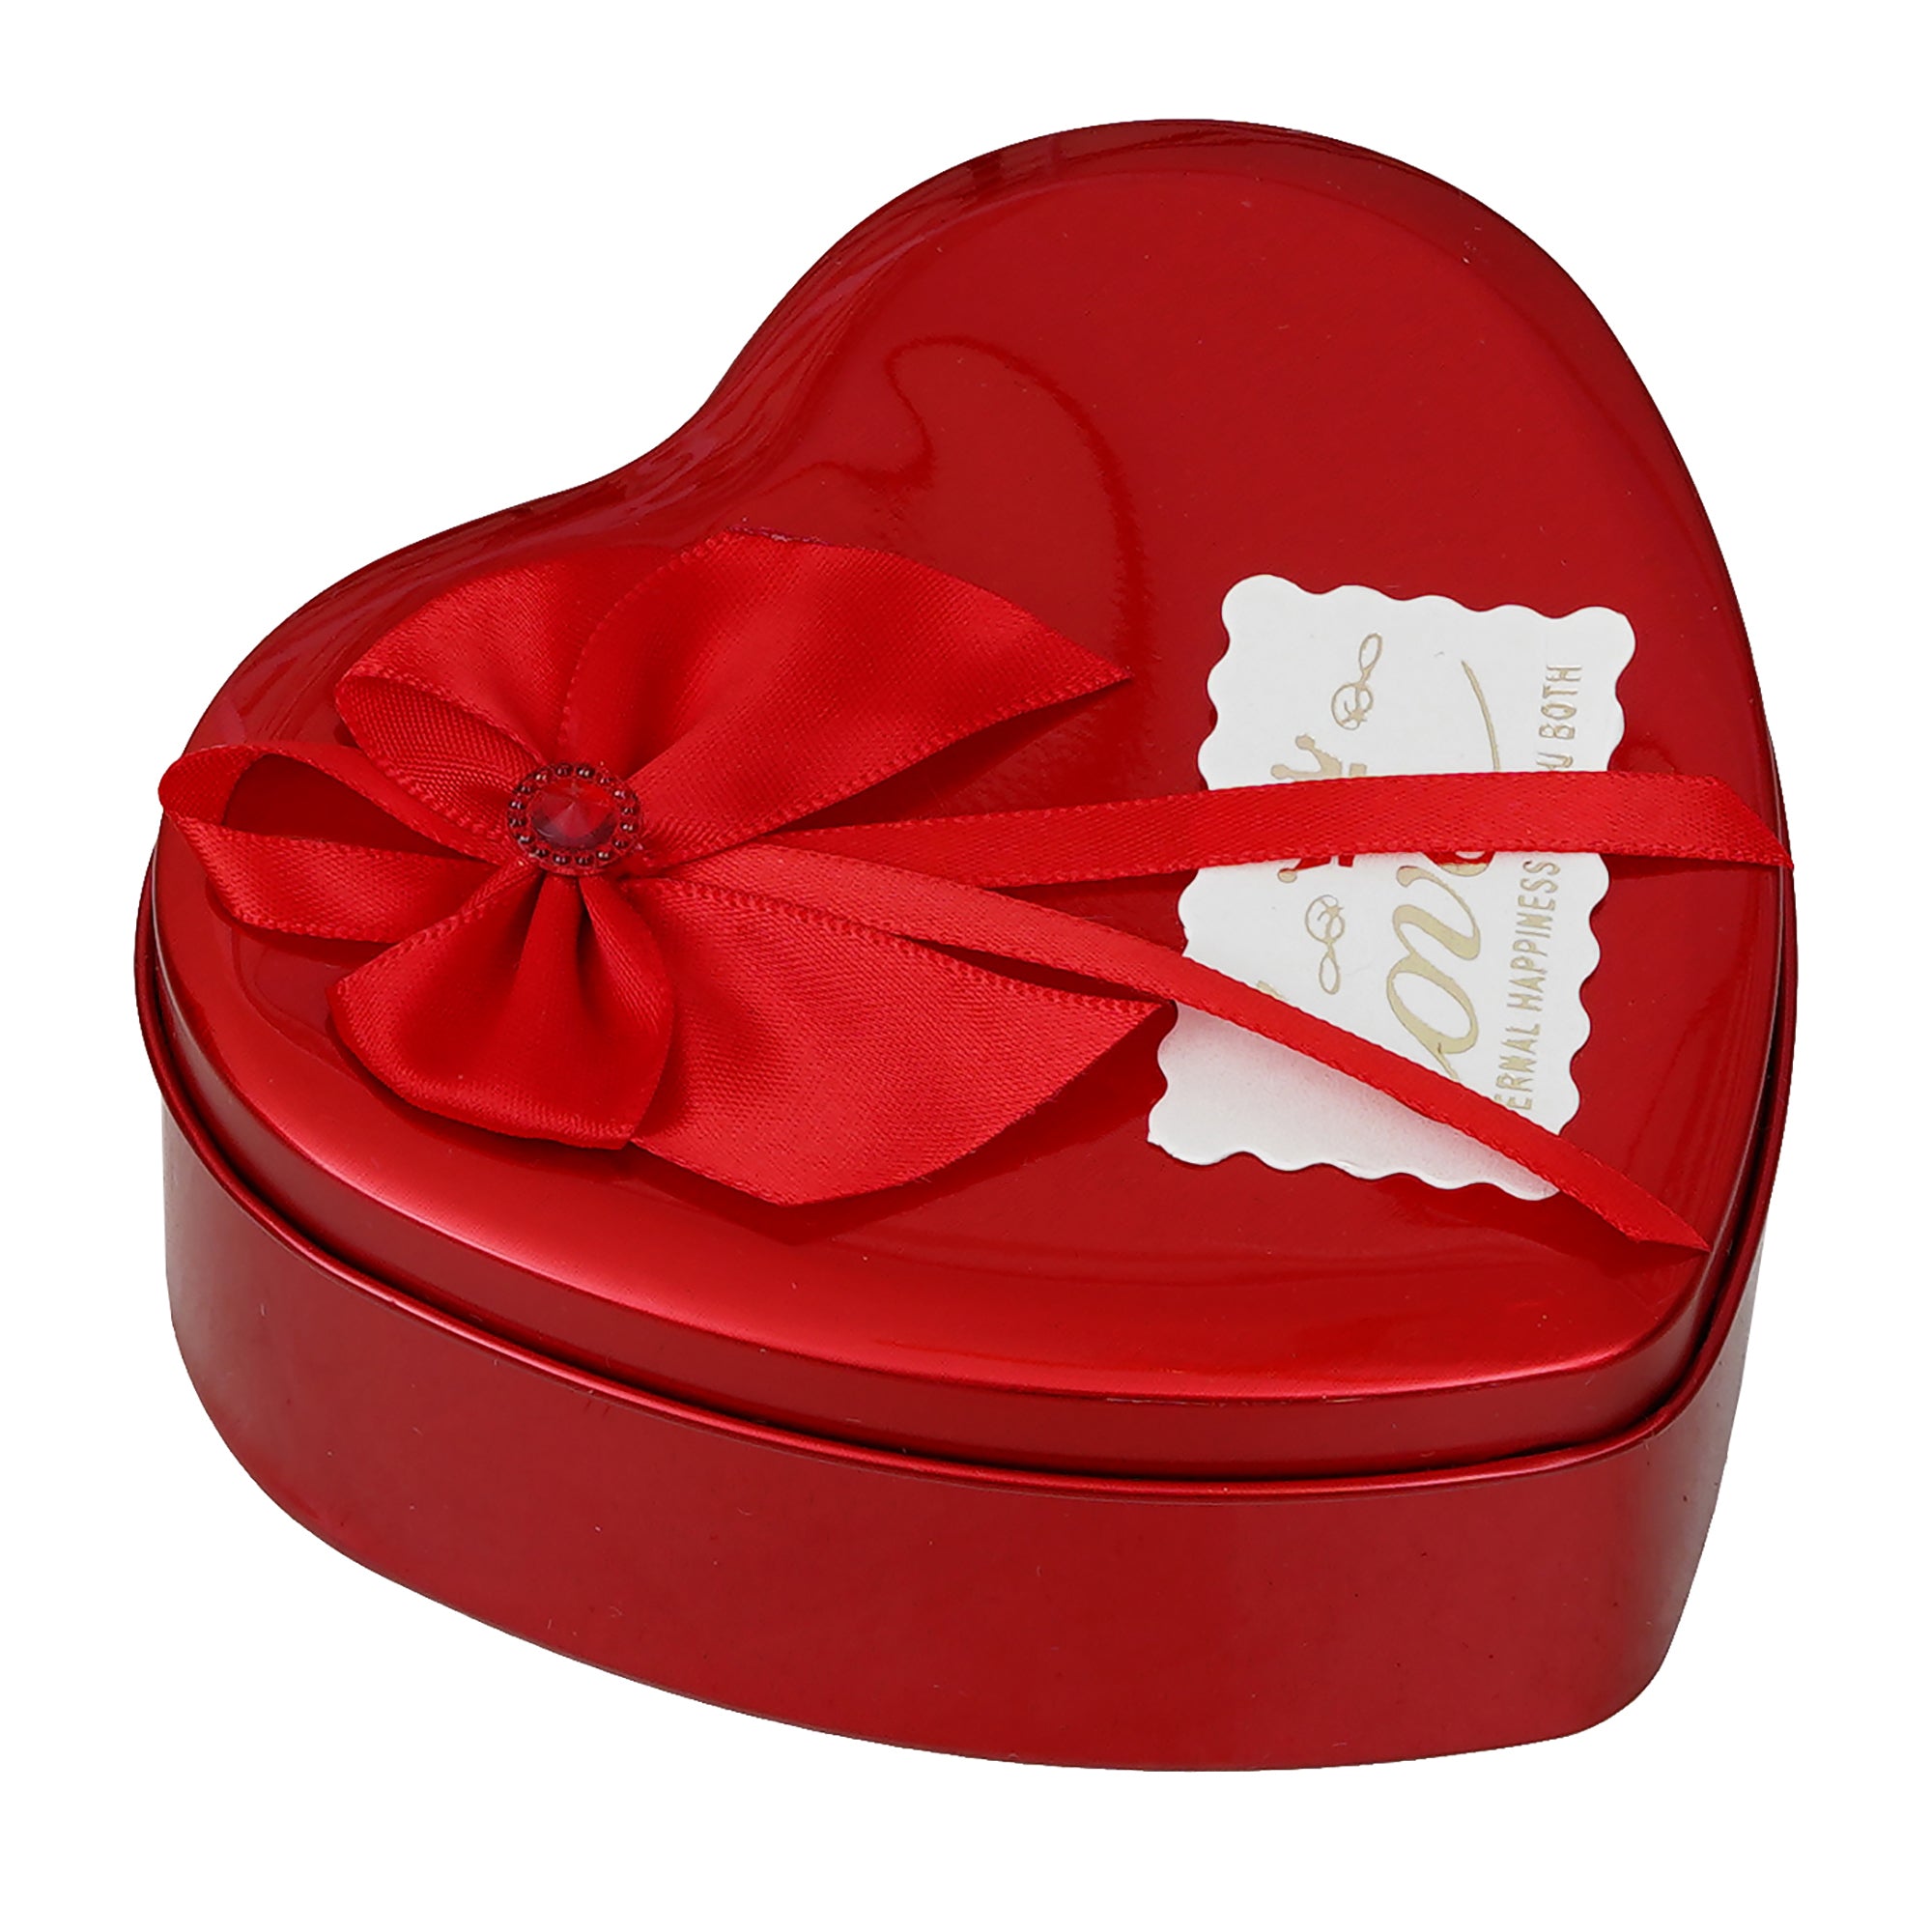 Red Heart Shaped Gift Box with 1 Golden Rose, 3 Red Roses, 1 Teddy Bear and a Card 5